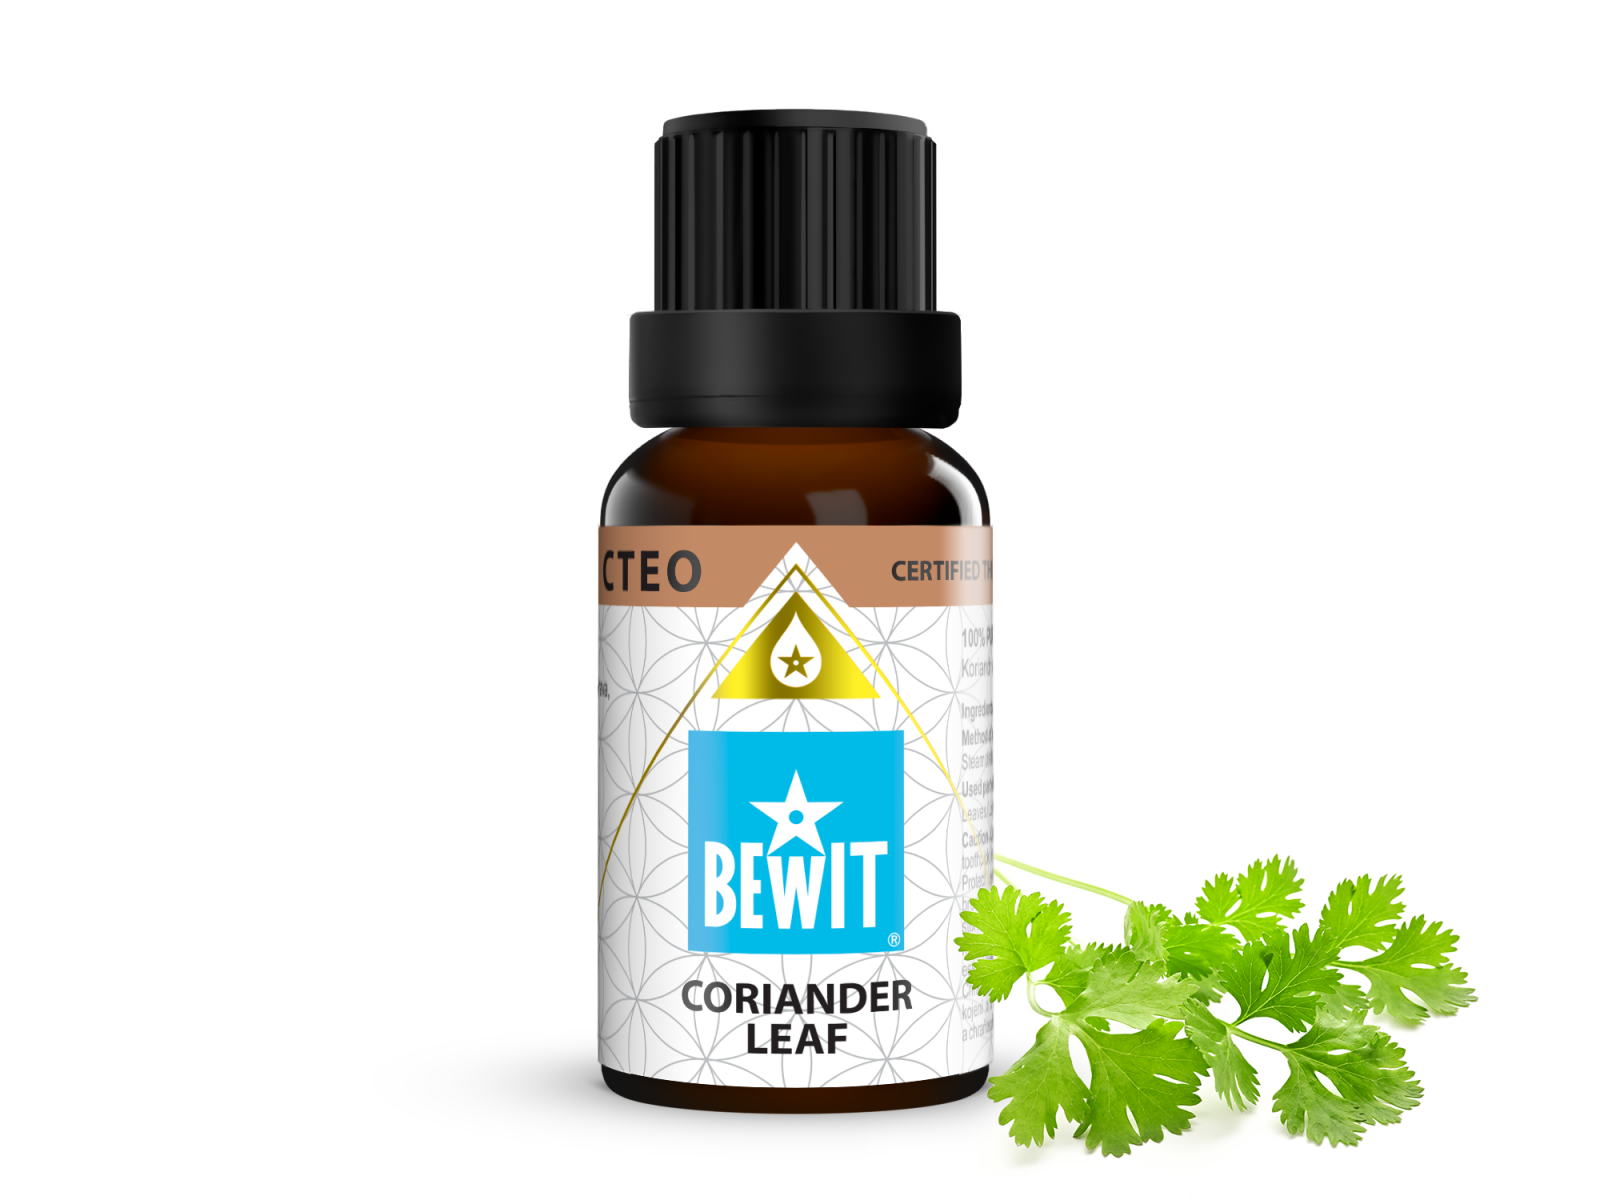 BEWIT Coriander leaf - 100% pure and natural CTEO® essential oil - 1